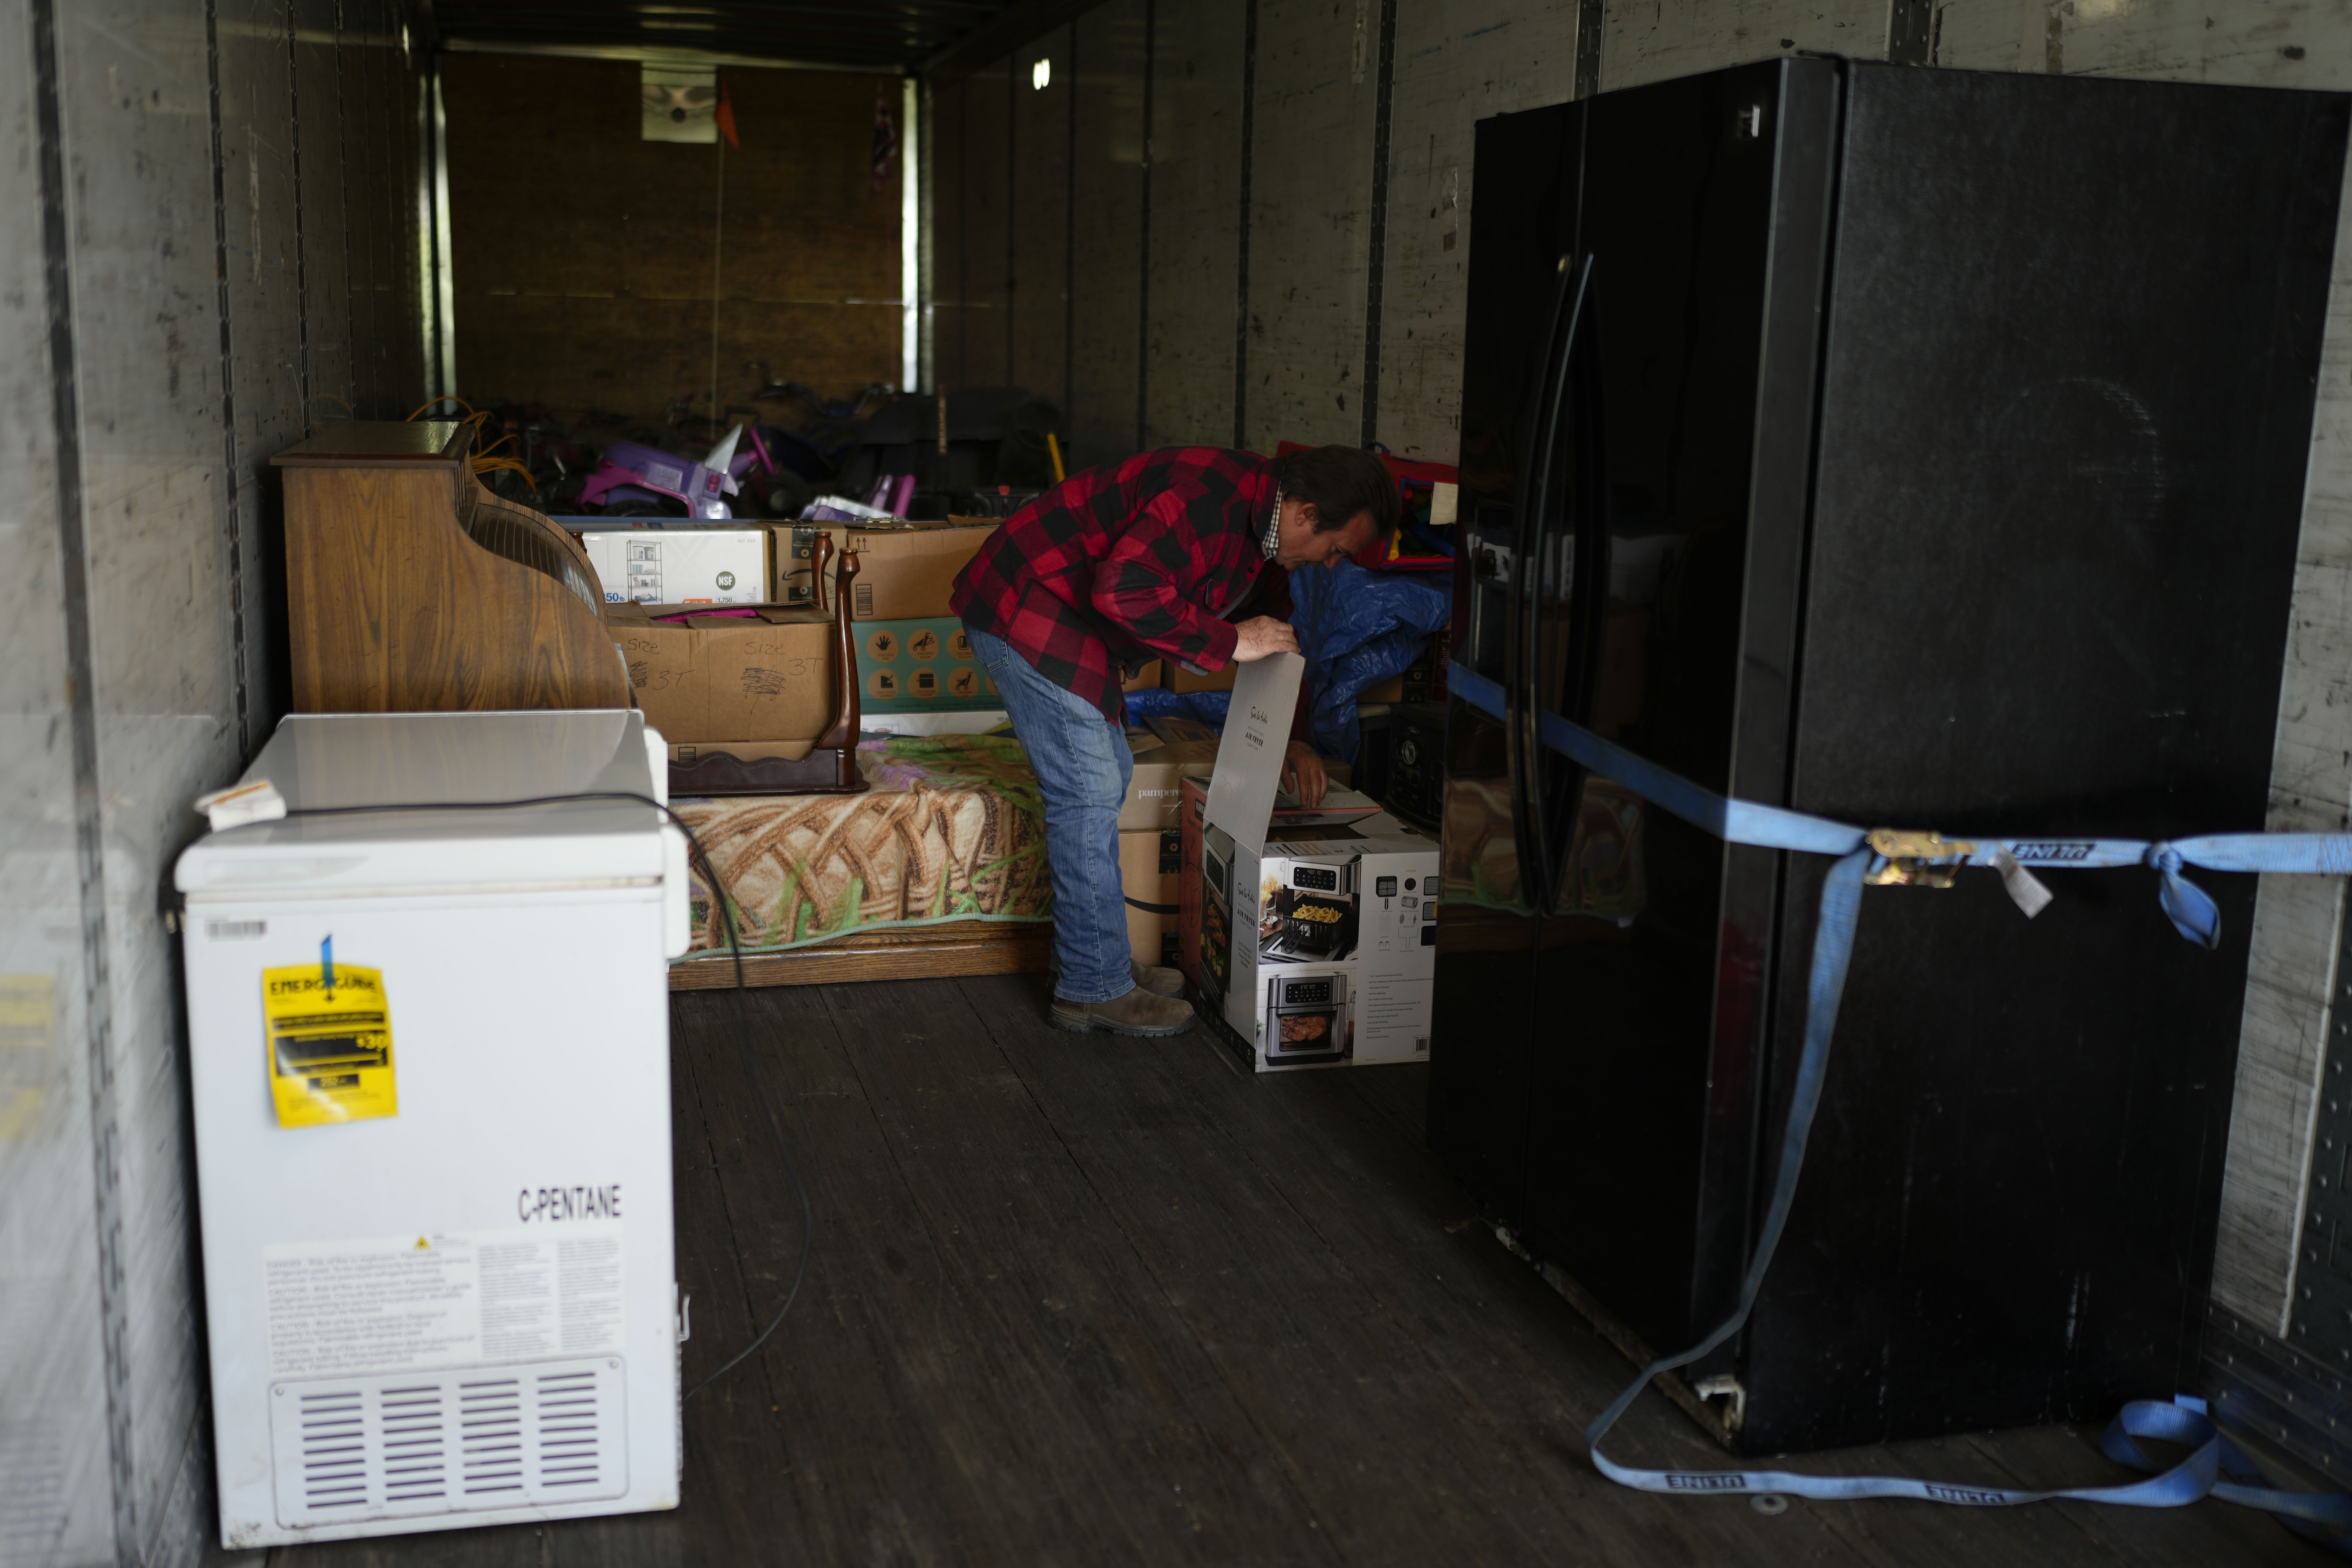 Ron Caetano opens a box in a trailer where he placed his family's belongings as a flood precaution, in Lemoore, Calif., Wednesday, April 19, 2023. (AP Photo/Jae C. Hong)